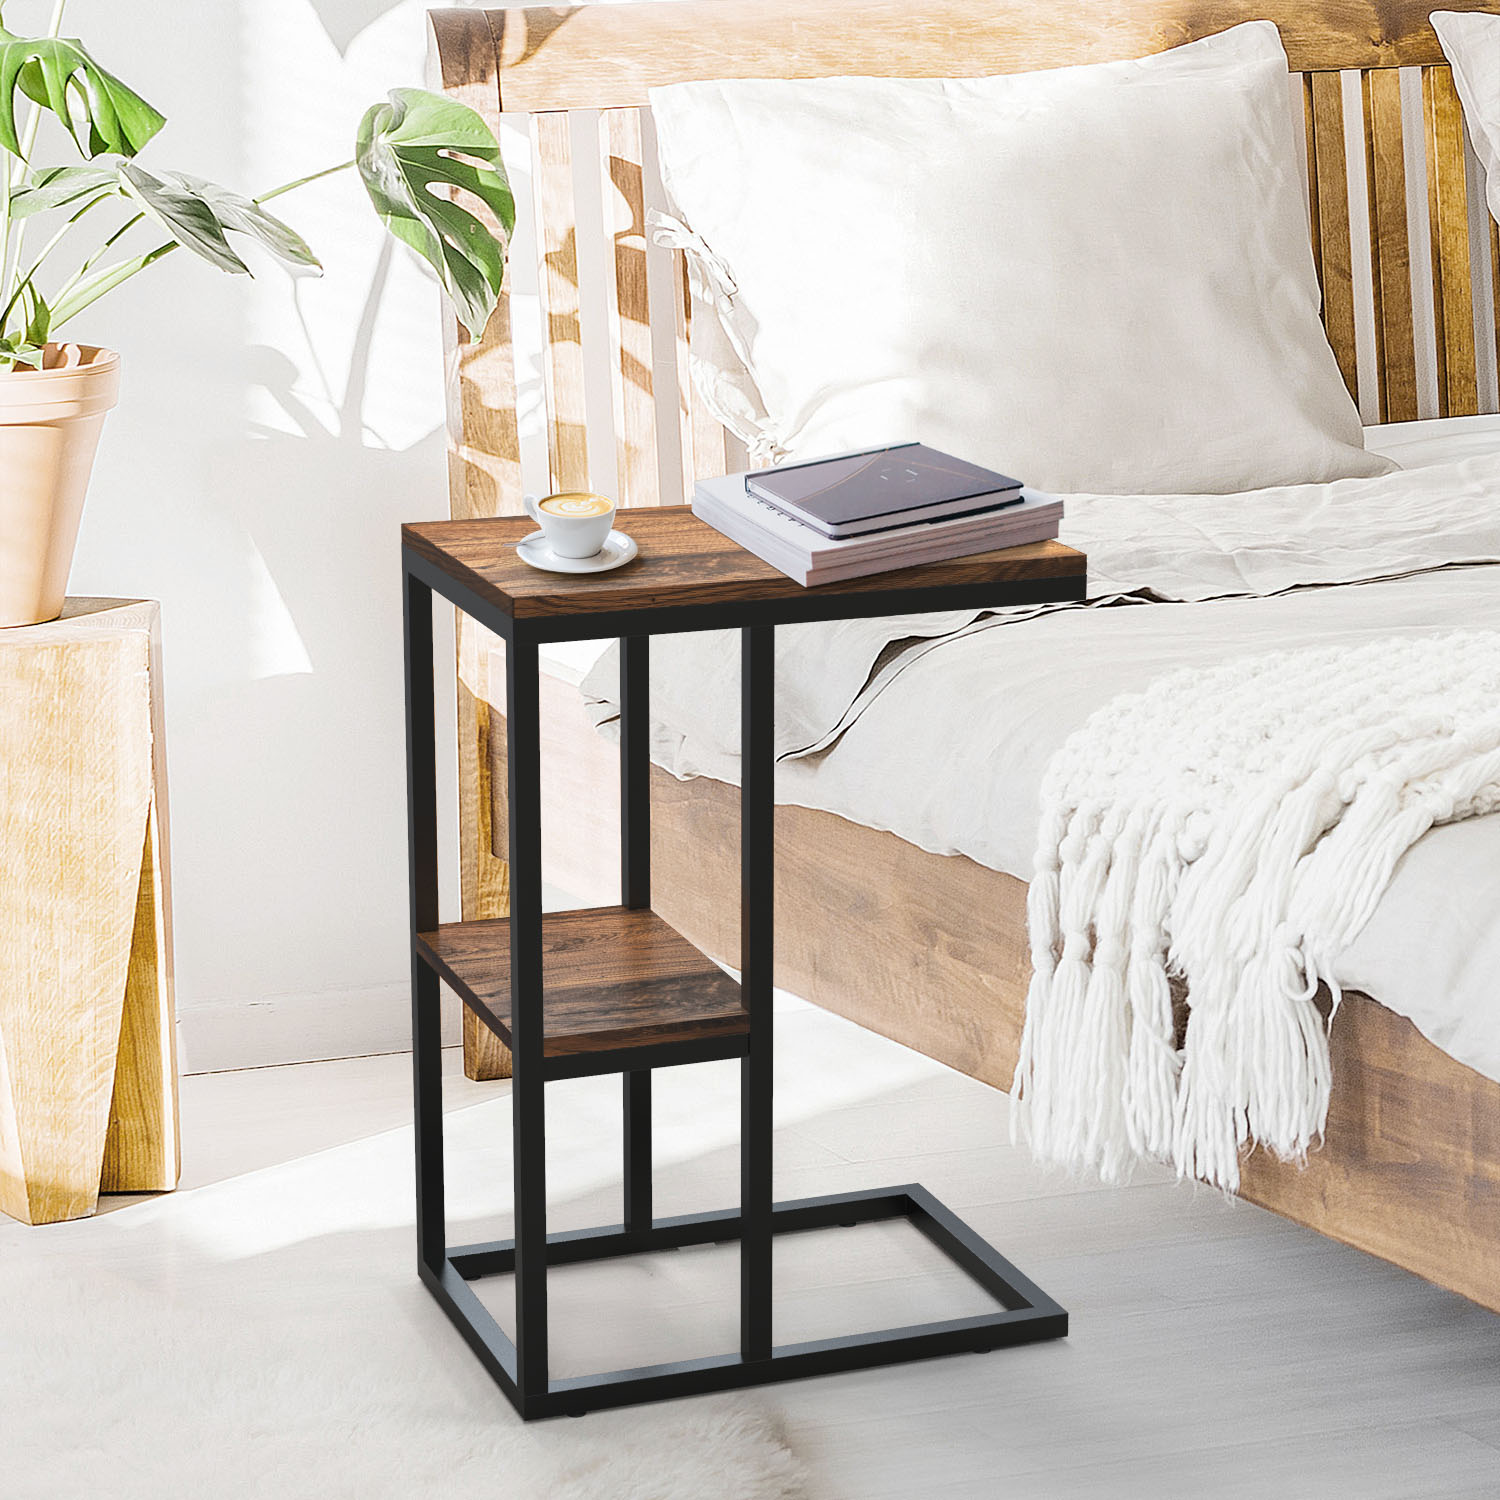 C Shaped Side Table Snack end Table with Storage Shelf Under The Sofa Overbed Table for Sofa Couch Living Room Bedroom  Small Spaces-Boyel Living